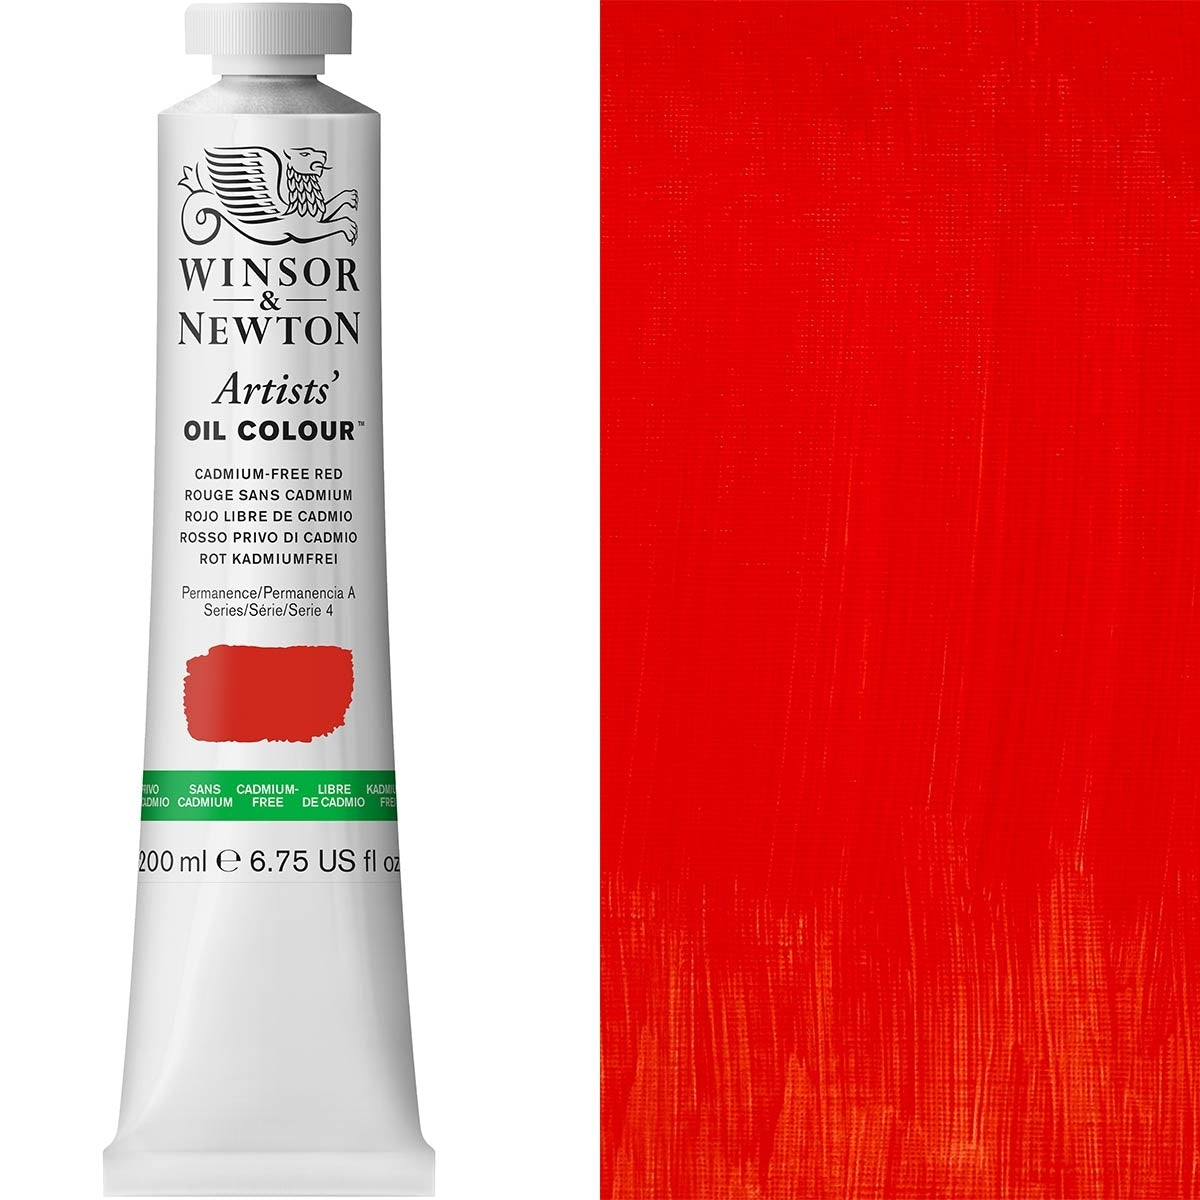 Winsor and Newton - Artists' Oil Colour - 200ml - Cad Free Red